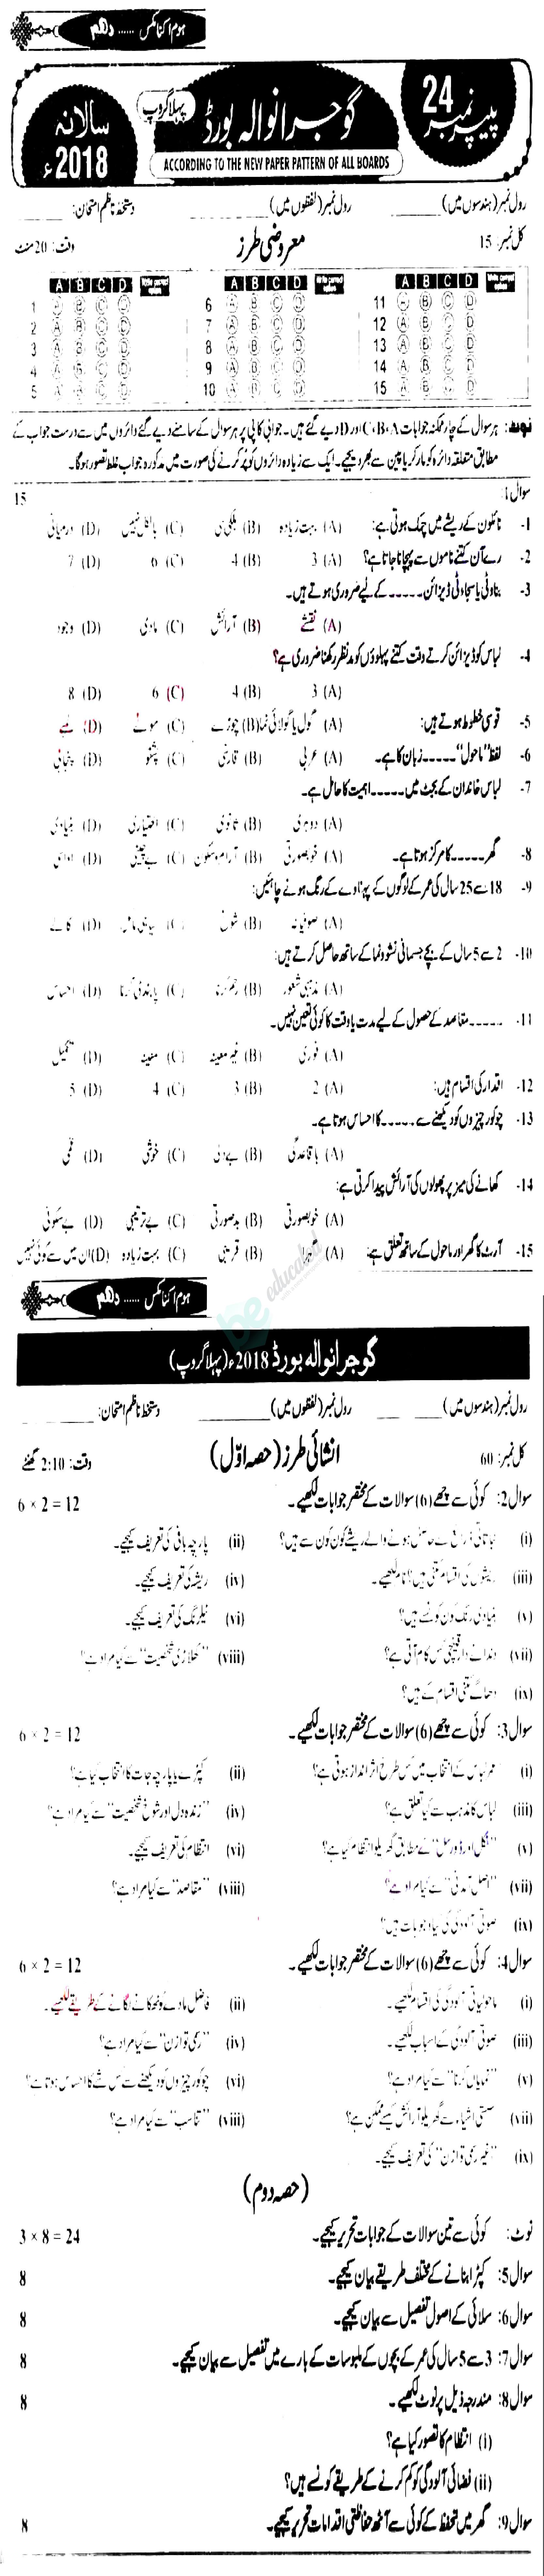 Home Economics 10th class Past Paper Group 1 BISE Gujranwala 2018